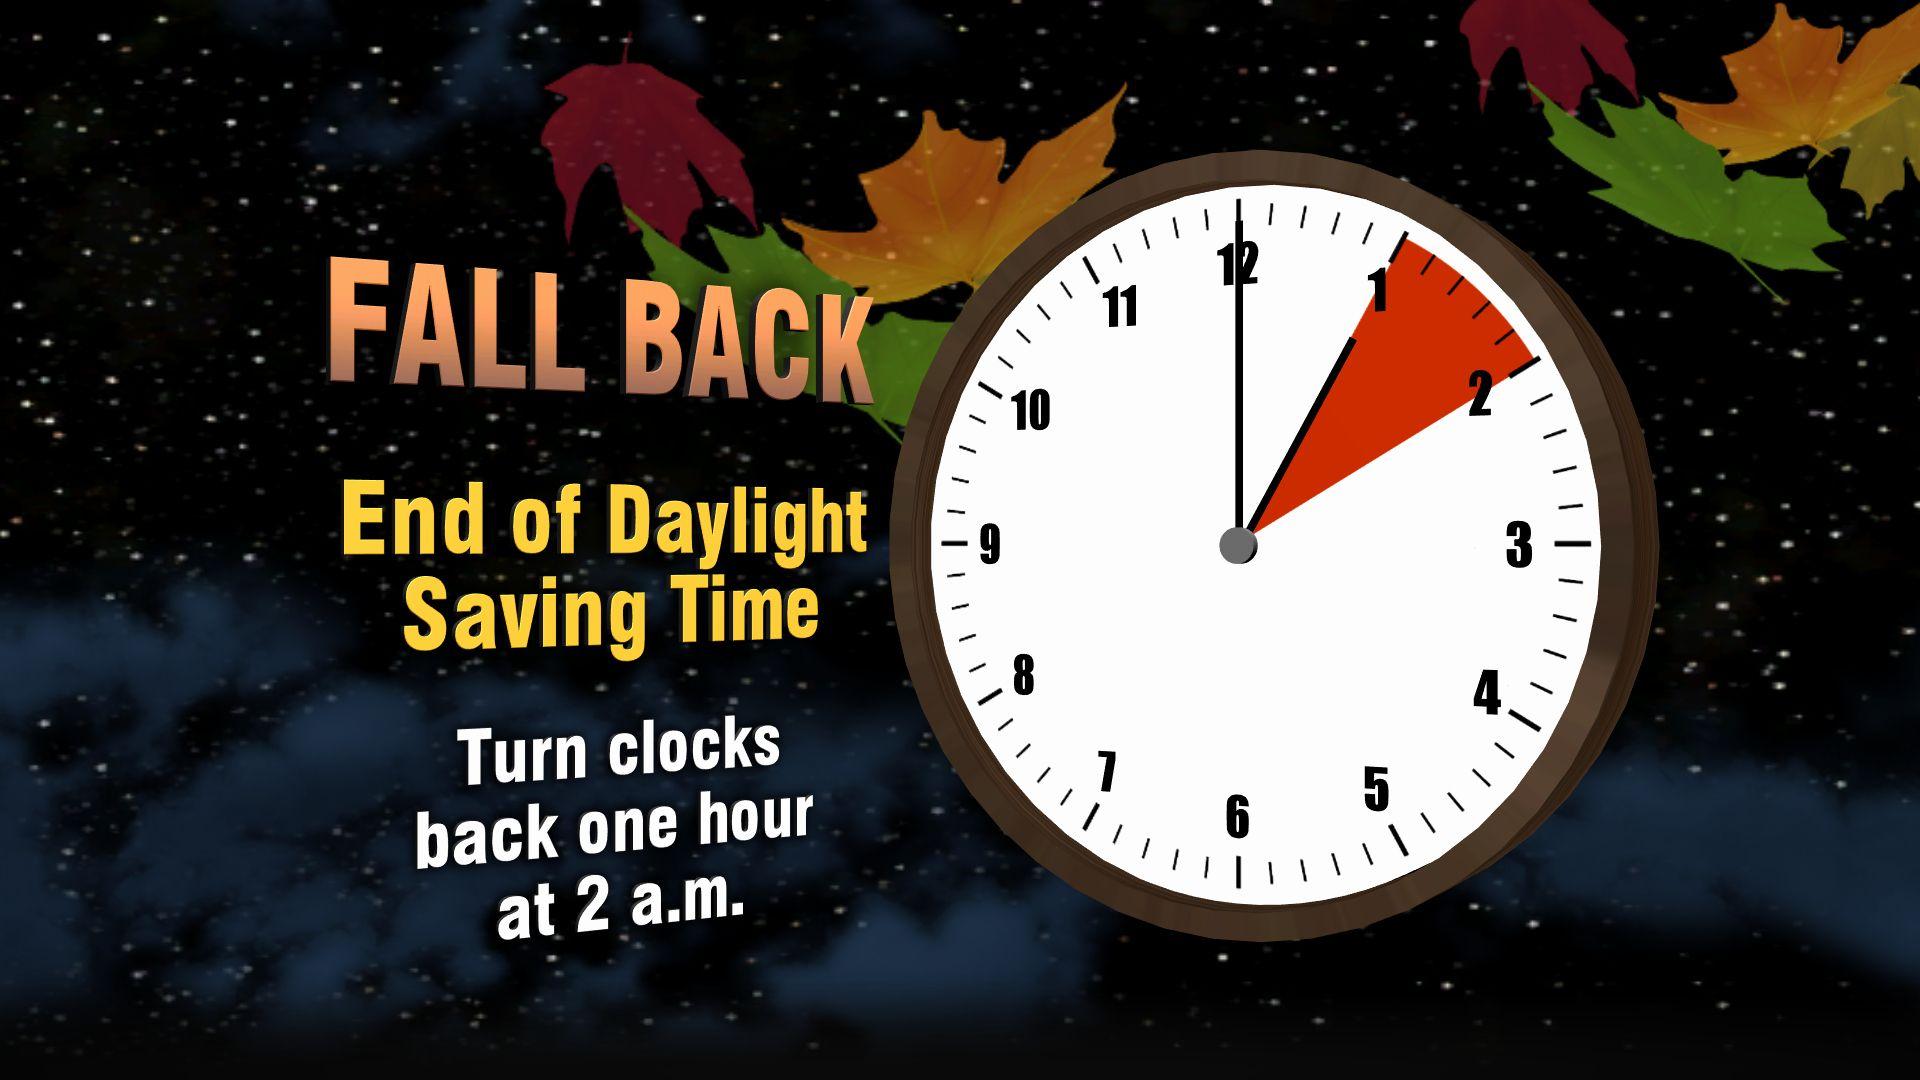 Fall Back Time Change 2018 Fall Back Day Light Saving Time Ends